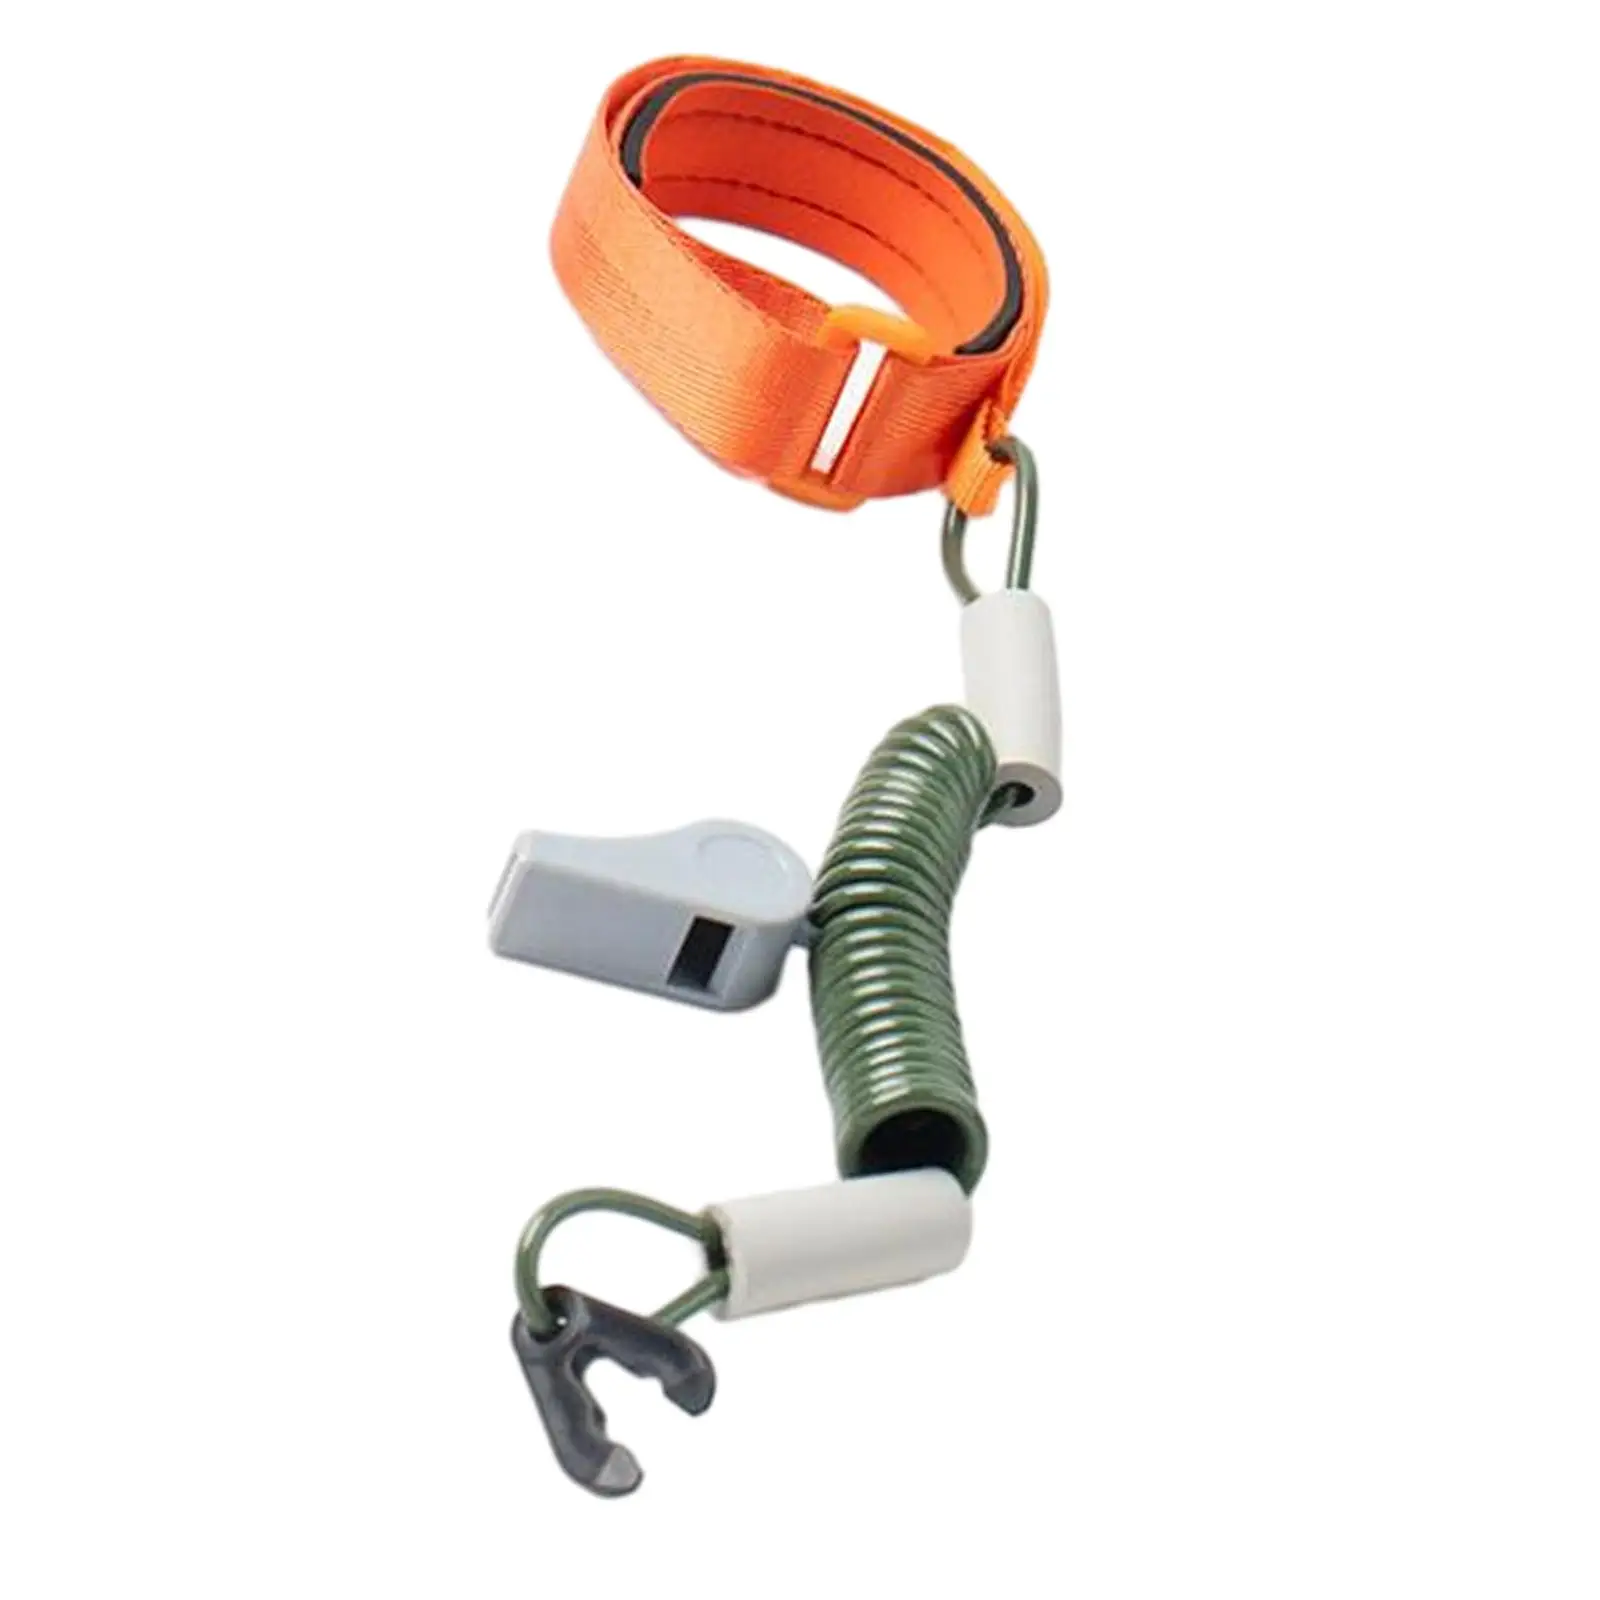 Boat Engine Safety Kill Stop Switch Lanyard Cord with Key Whistle Portable